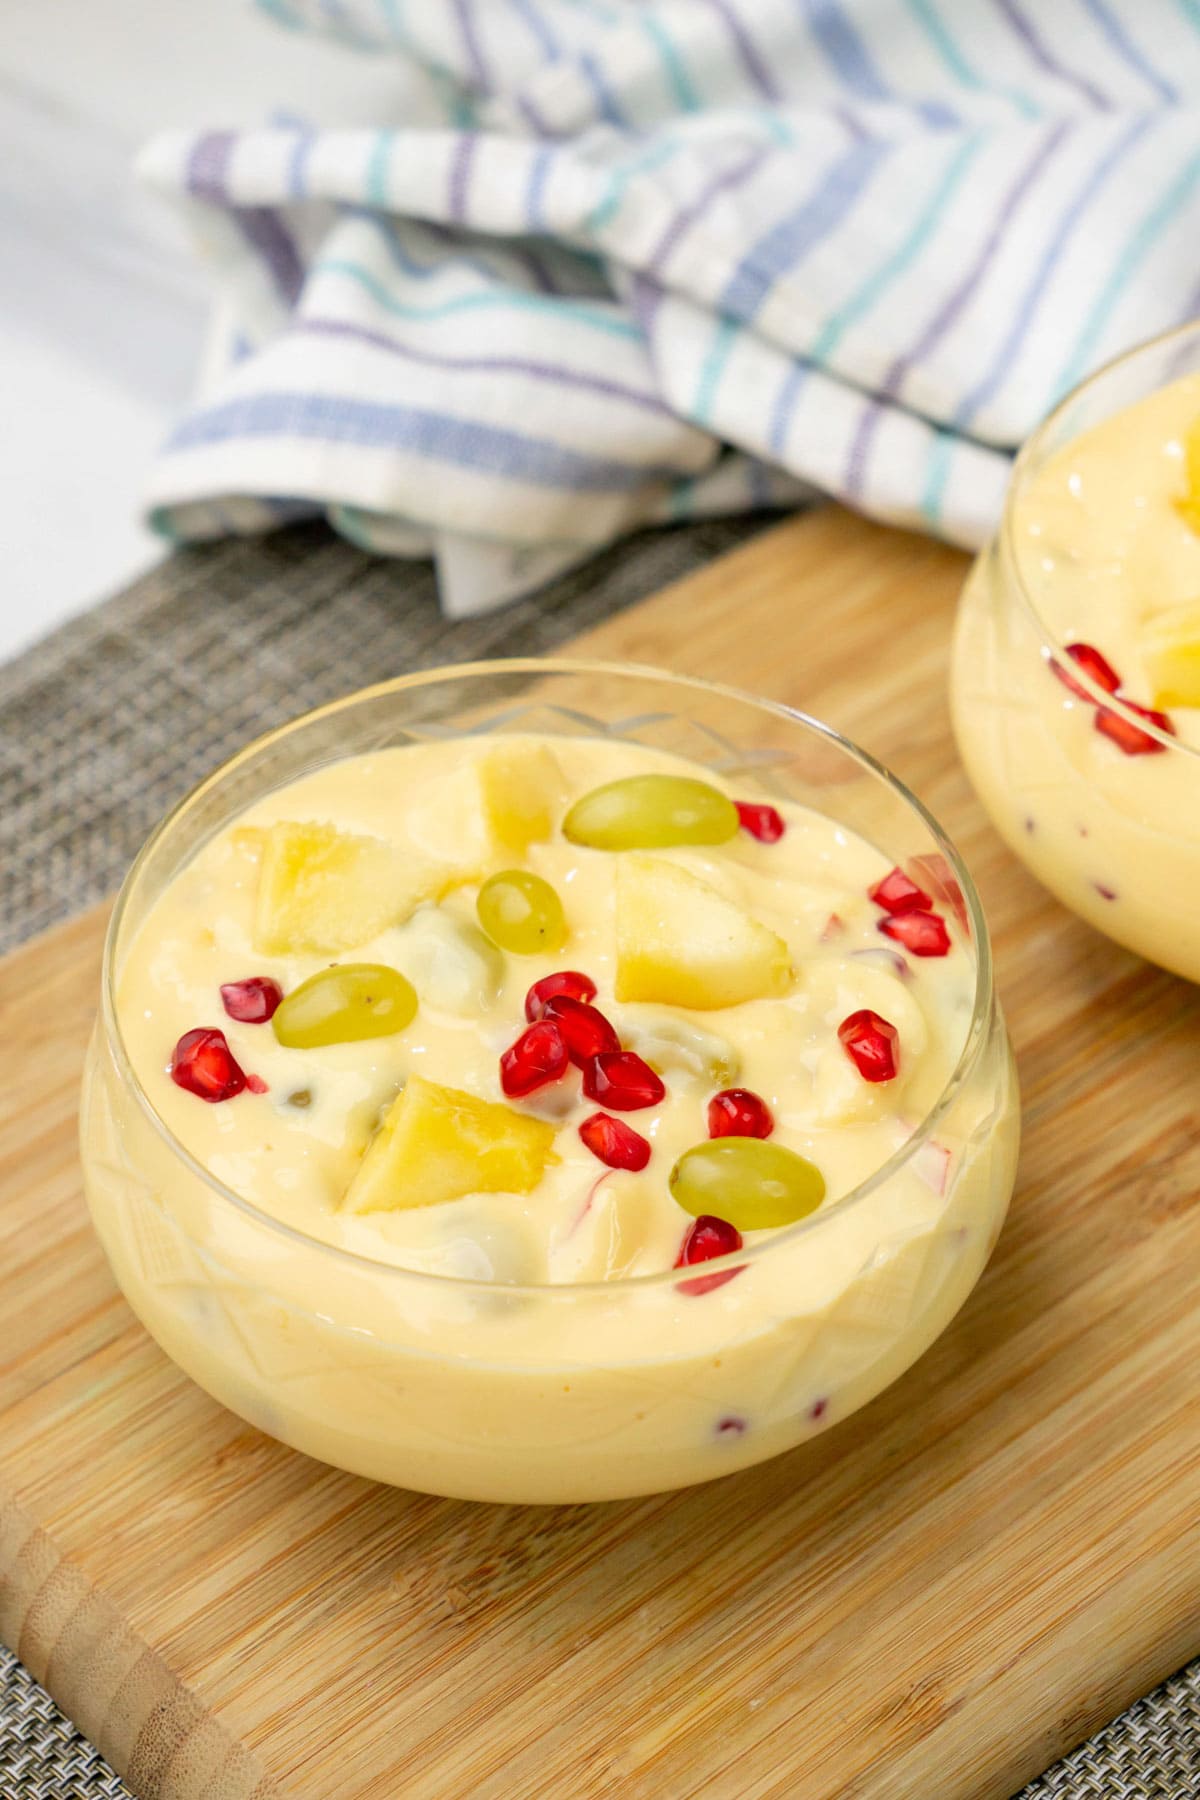 Fruit custard made with milk and brown and polson custard powder served in a glass bowl.